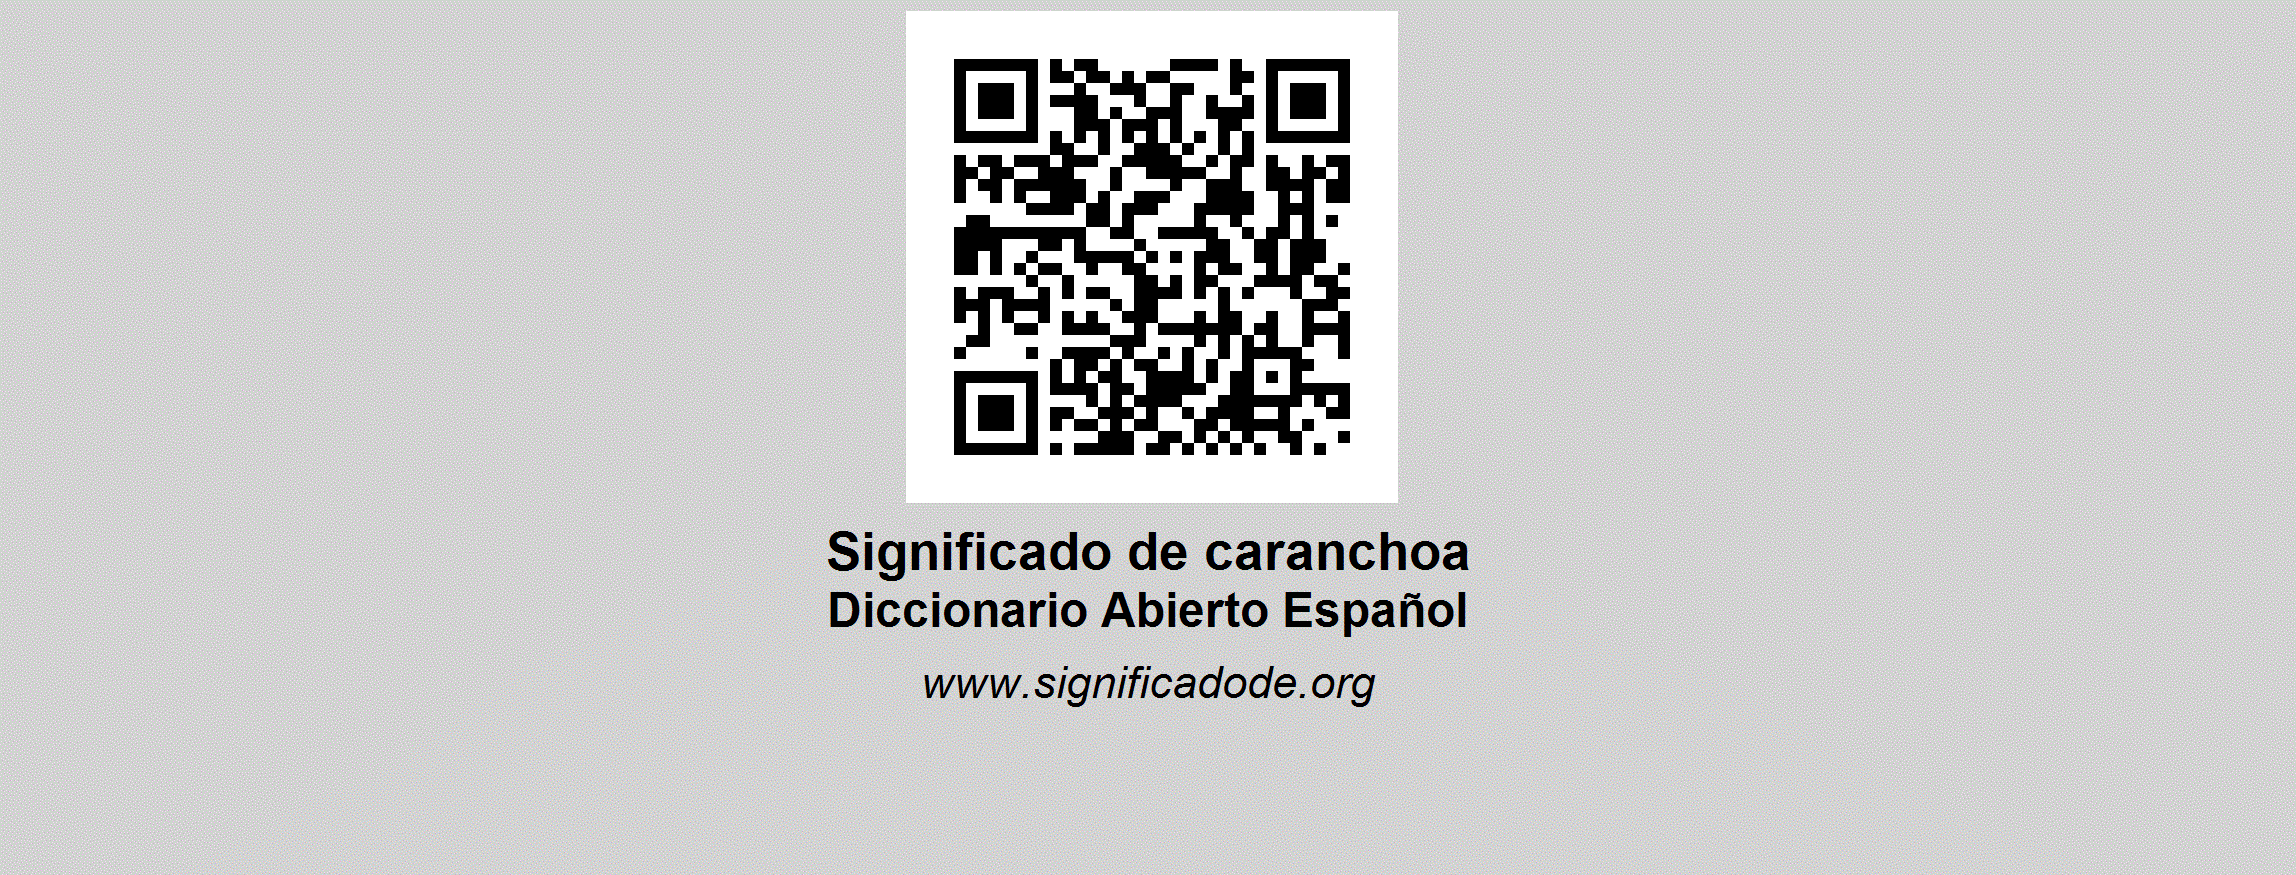 www.significadode.org